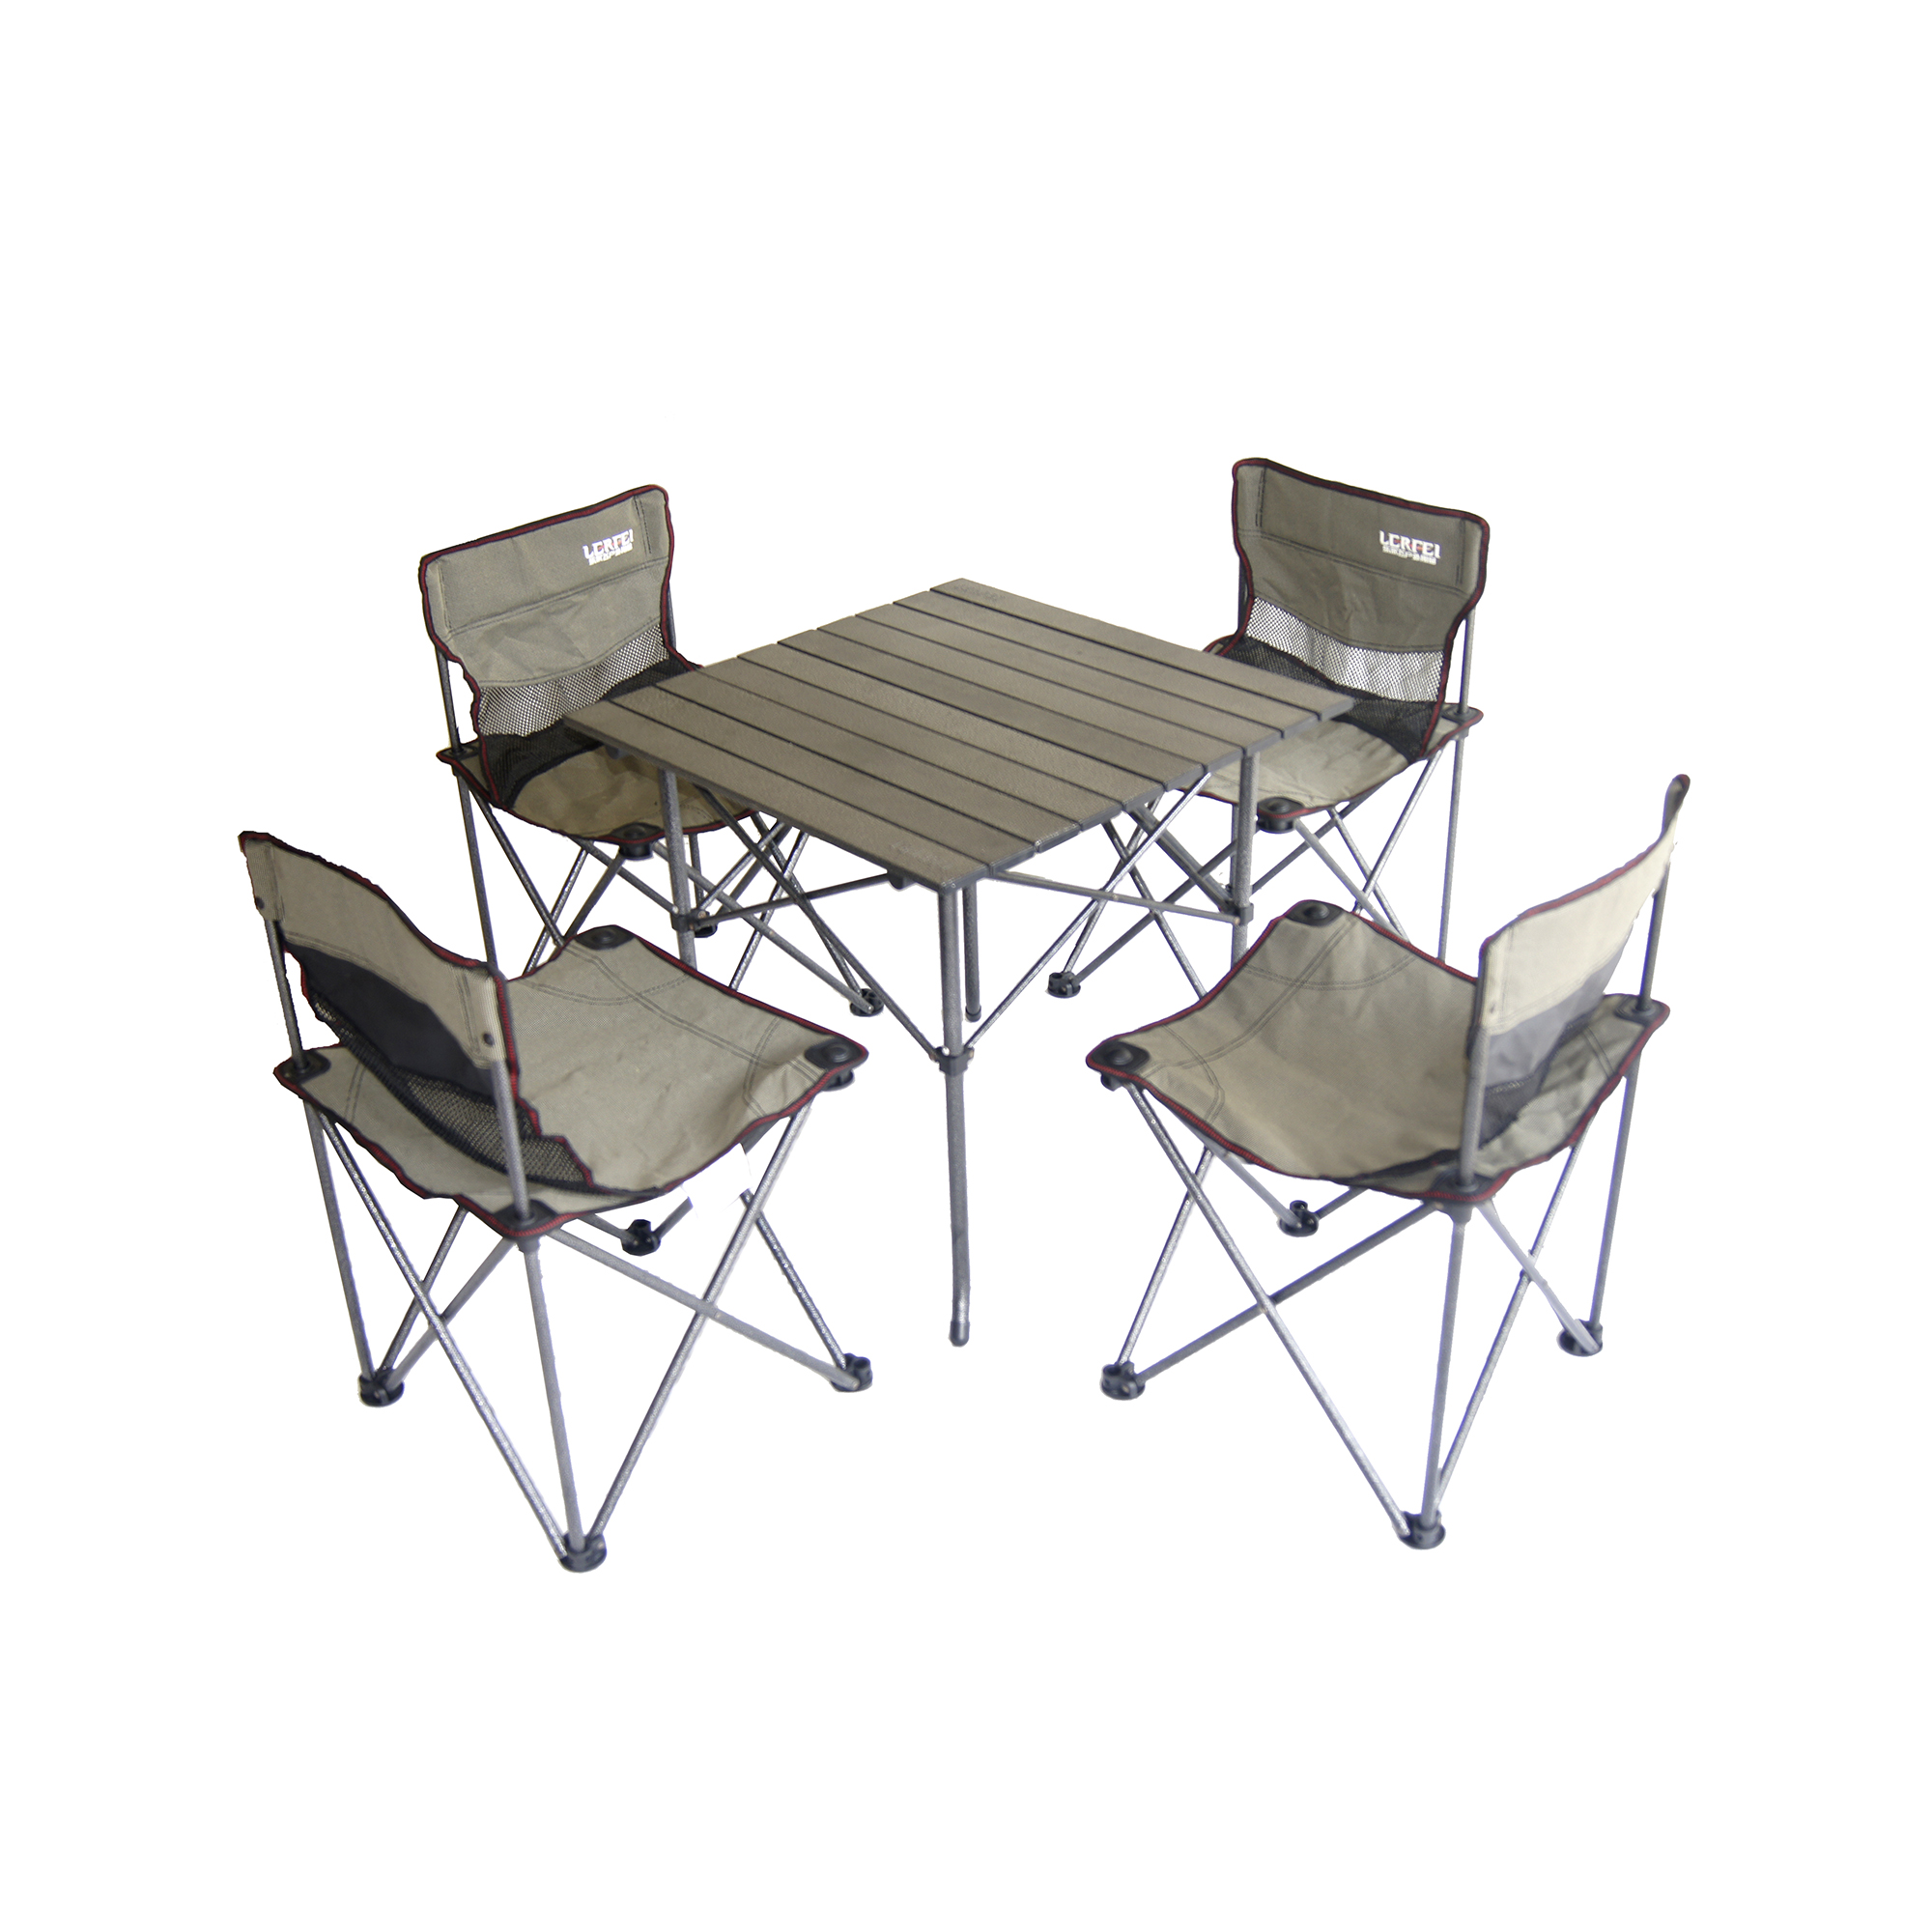 Ore International Portable Children's Camping Table and Chair Set